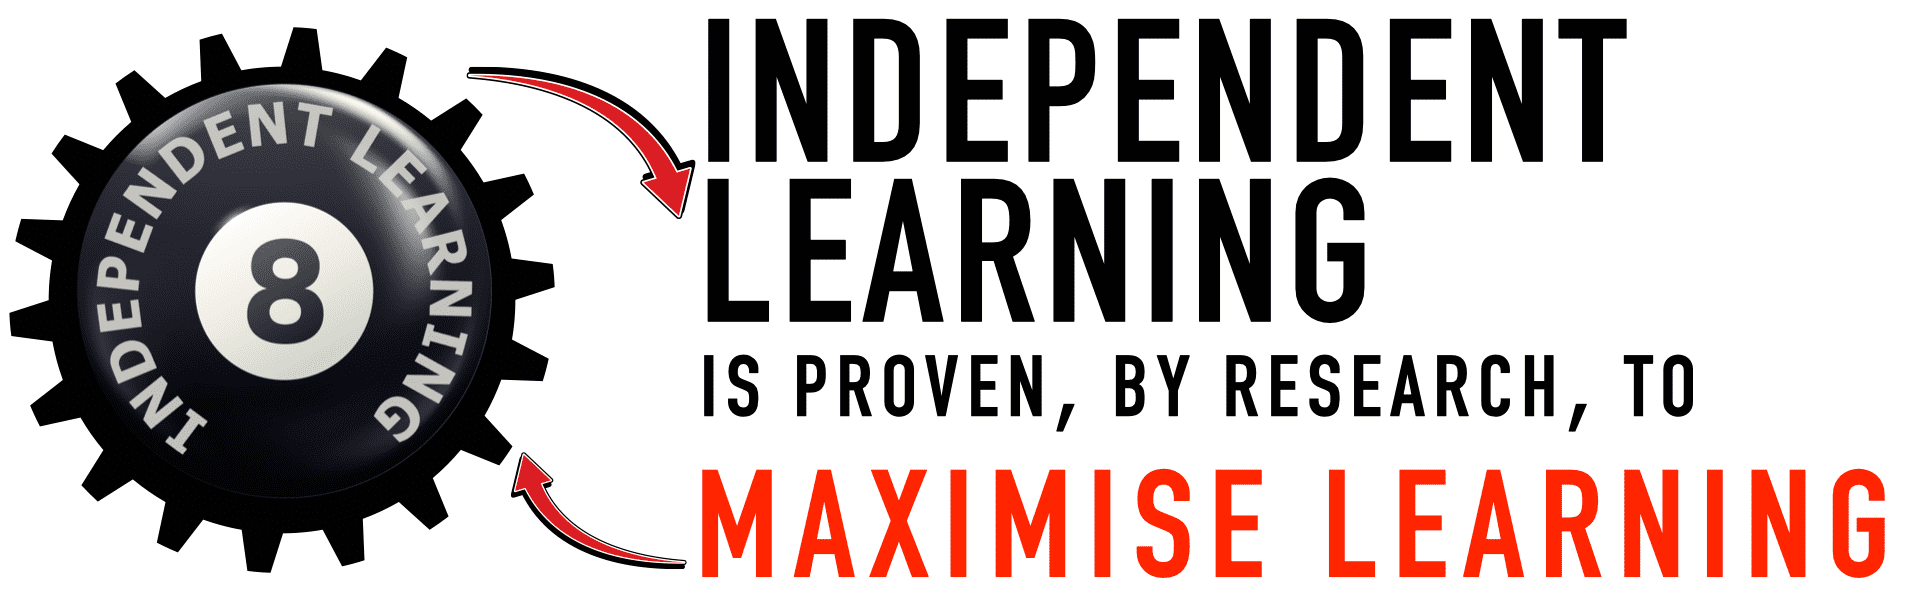 The graphic shows one black cog for the evidence based learning skill number 8 of independent learning  with the text "INDEPENDENT LEARNING IS PROVEN, BY RESEARCH, TO MAXIMISE LEARNING"